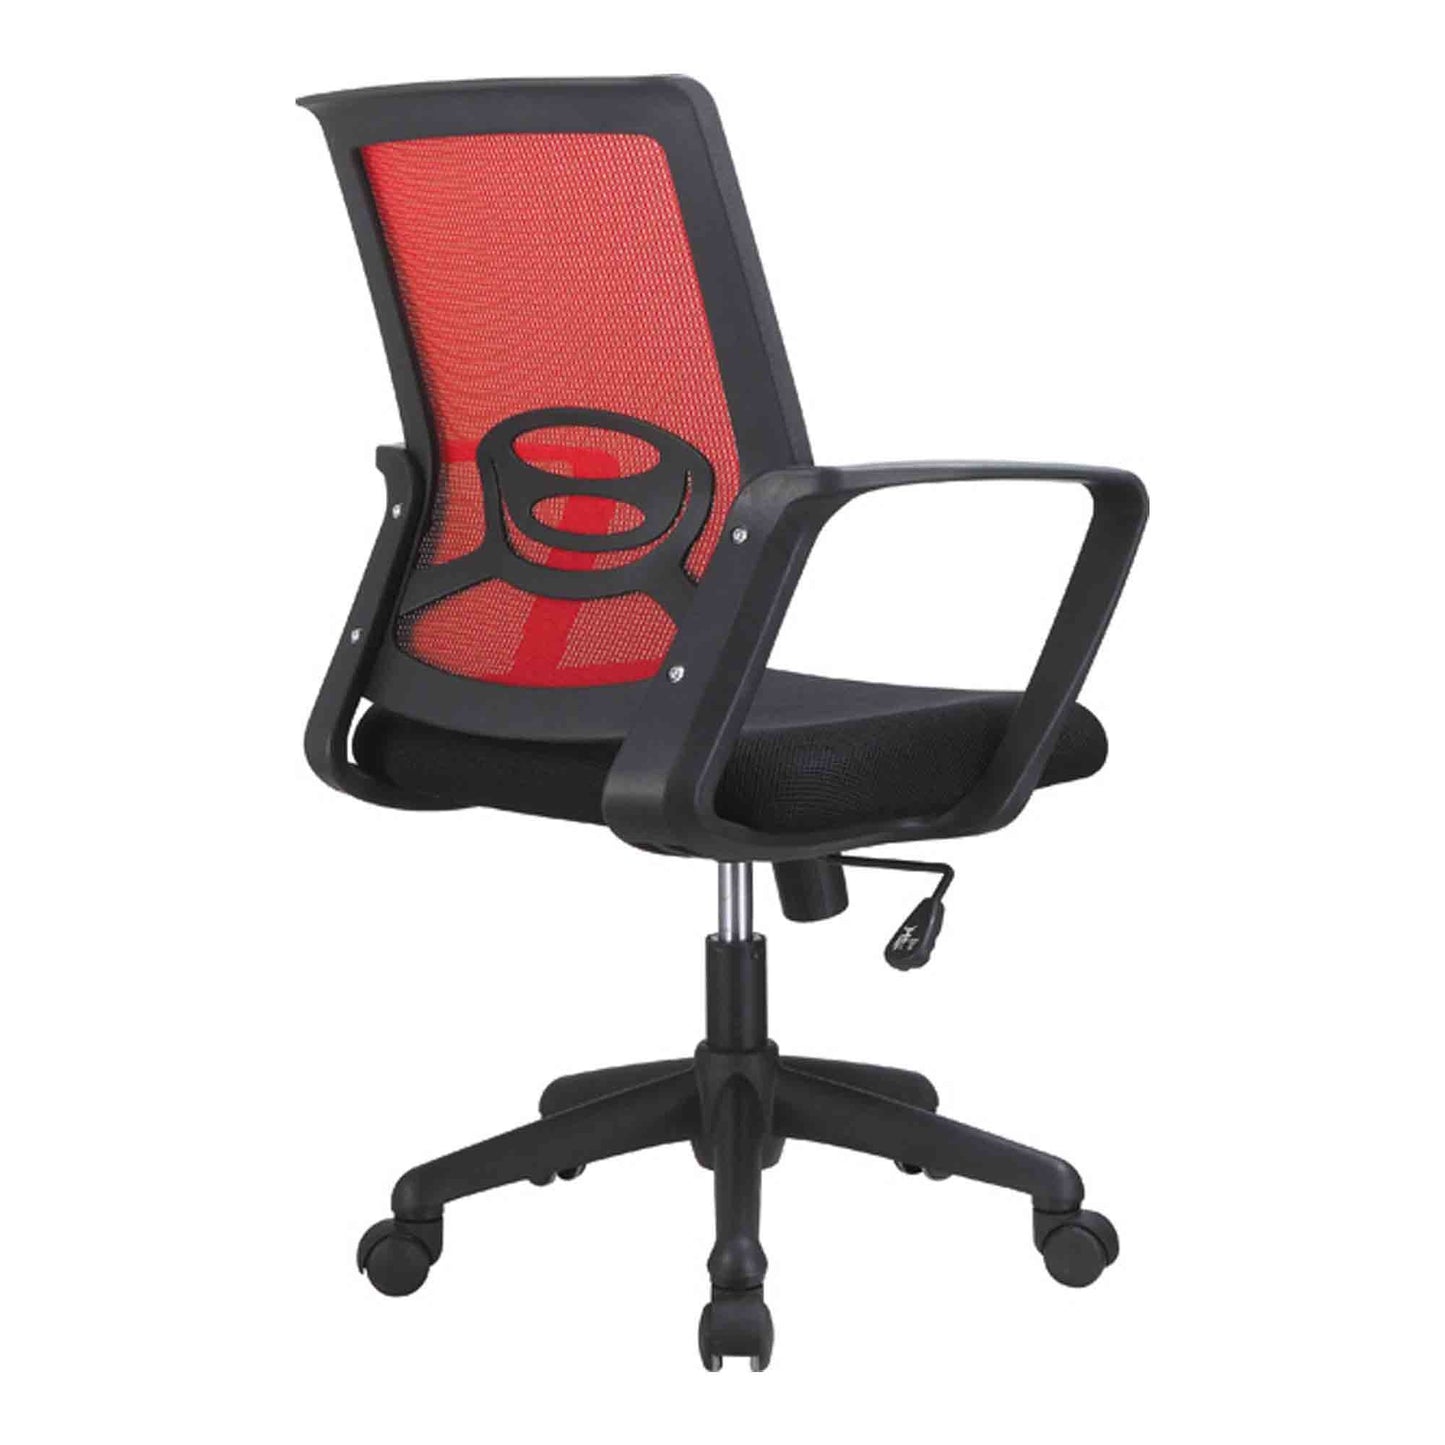 Office Chair - mch0023